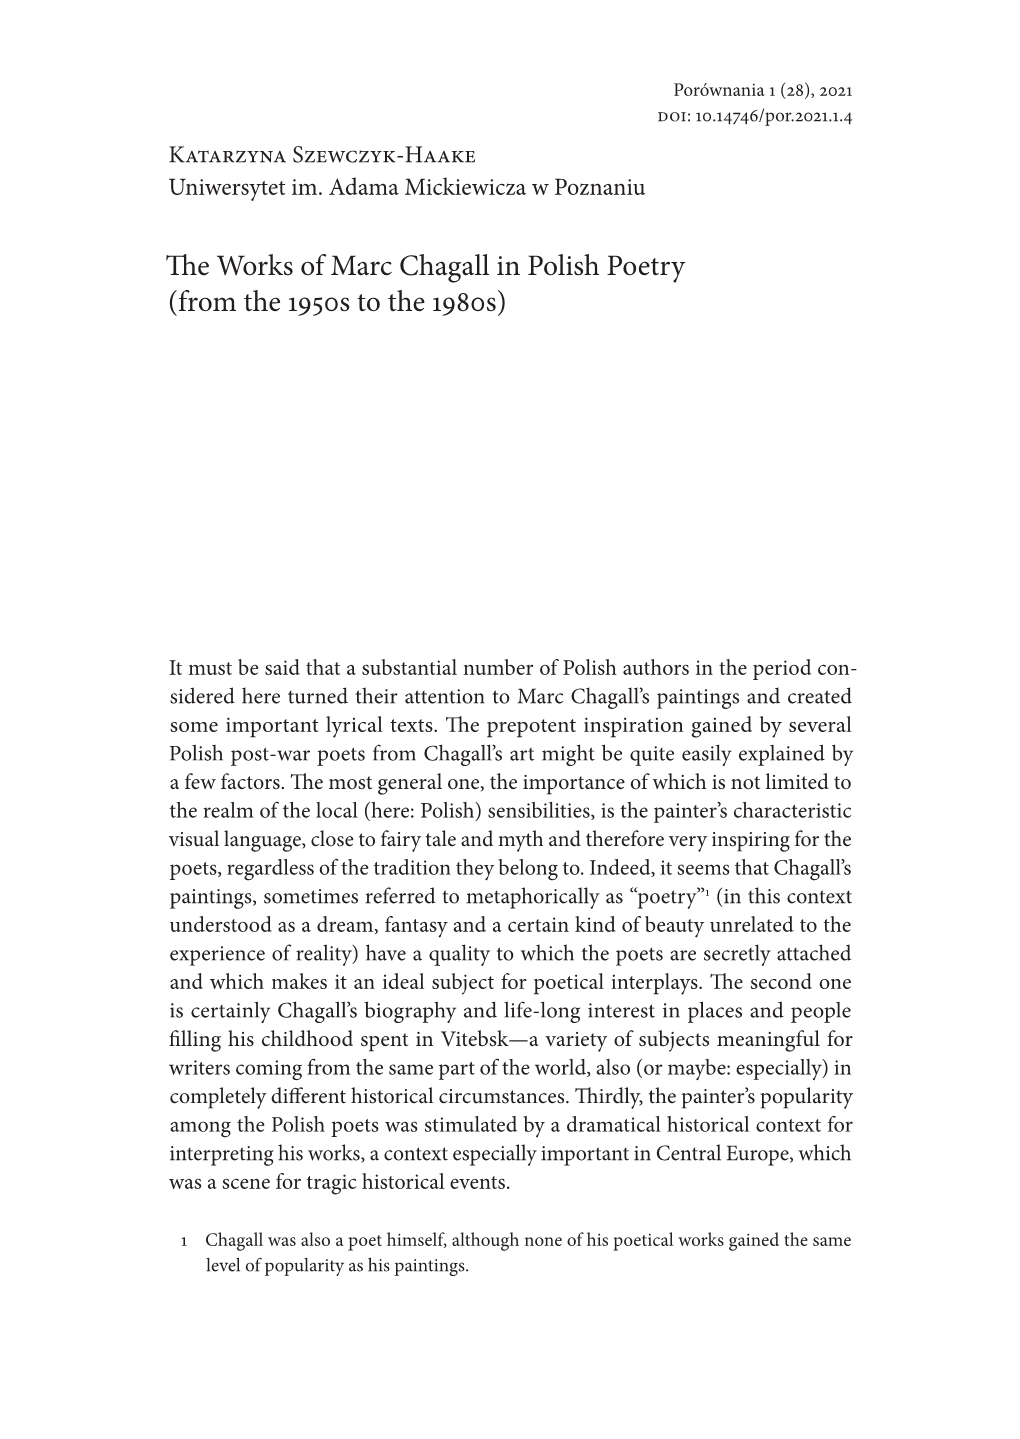 The Works of Marc Chagall in Polish Poetry (From the 1950S to the 1980S)